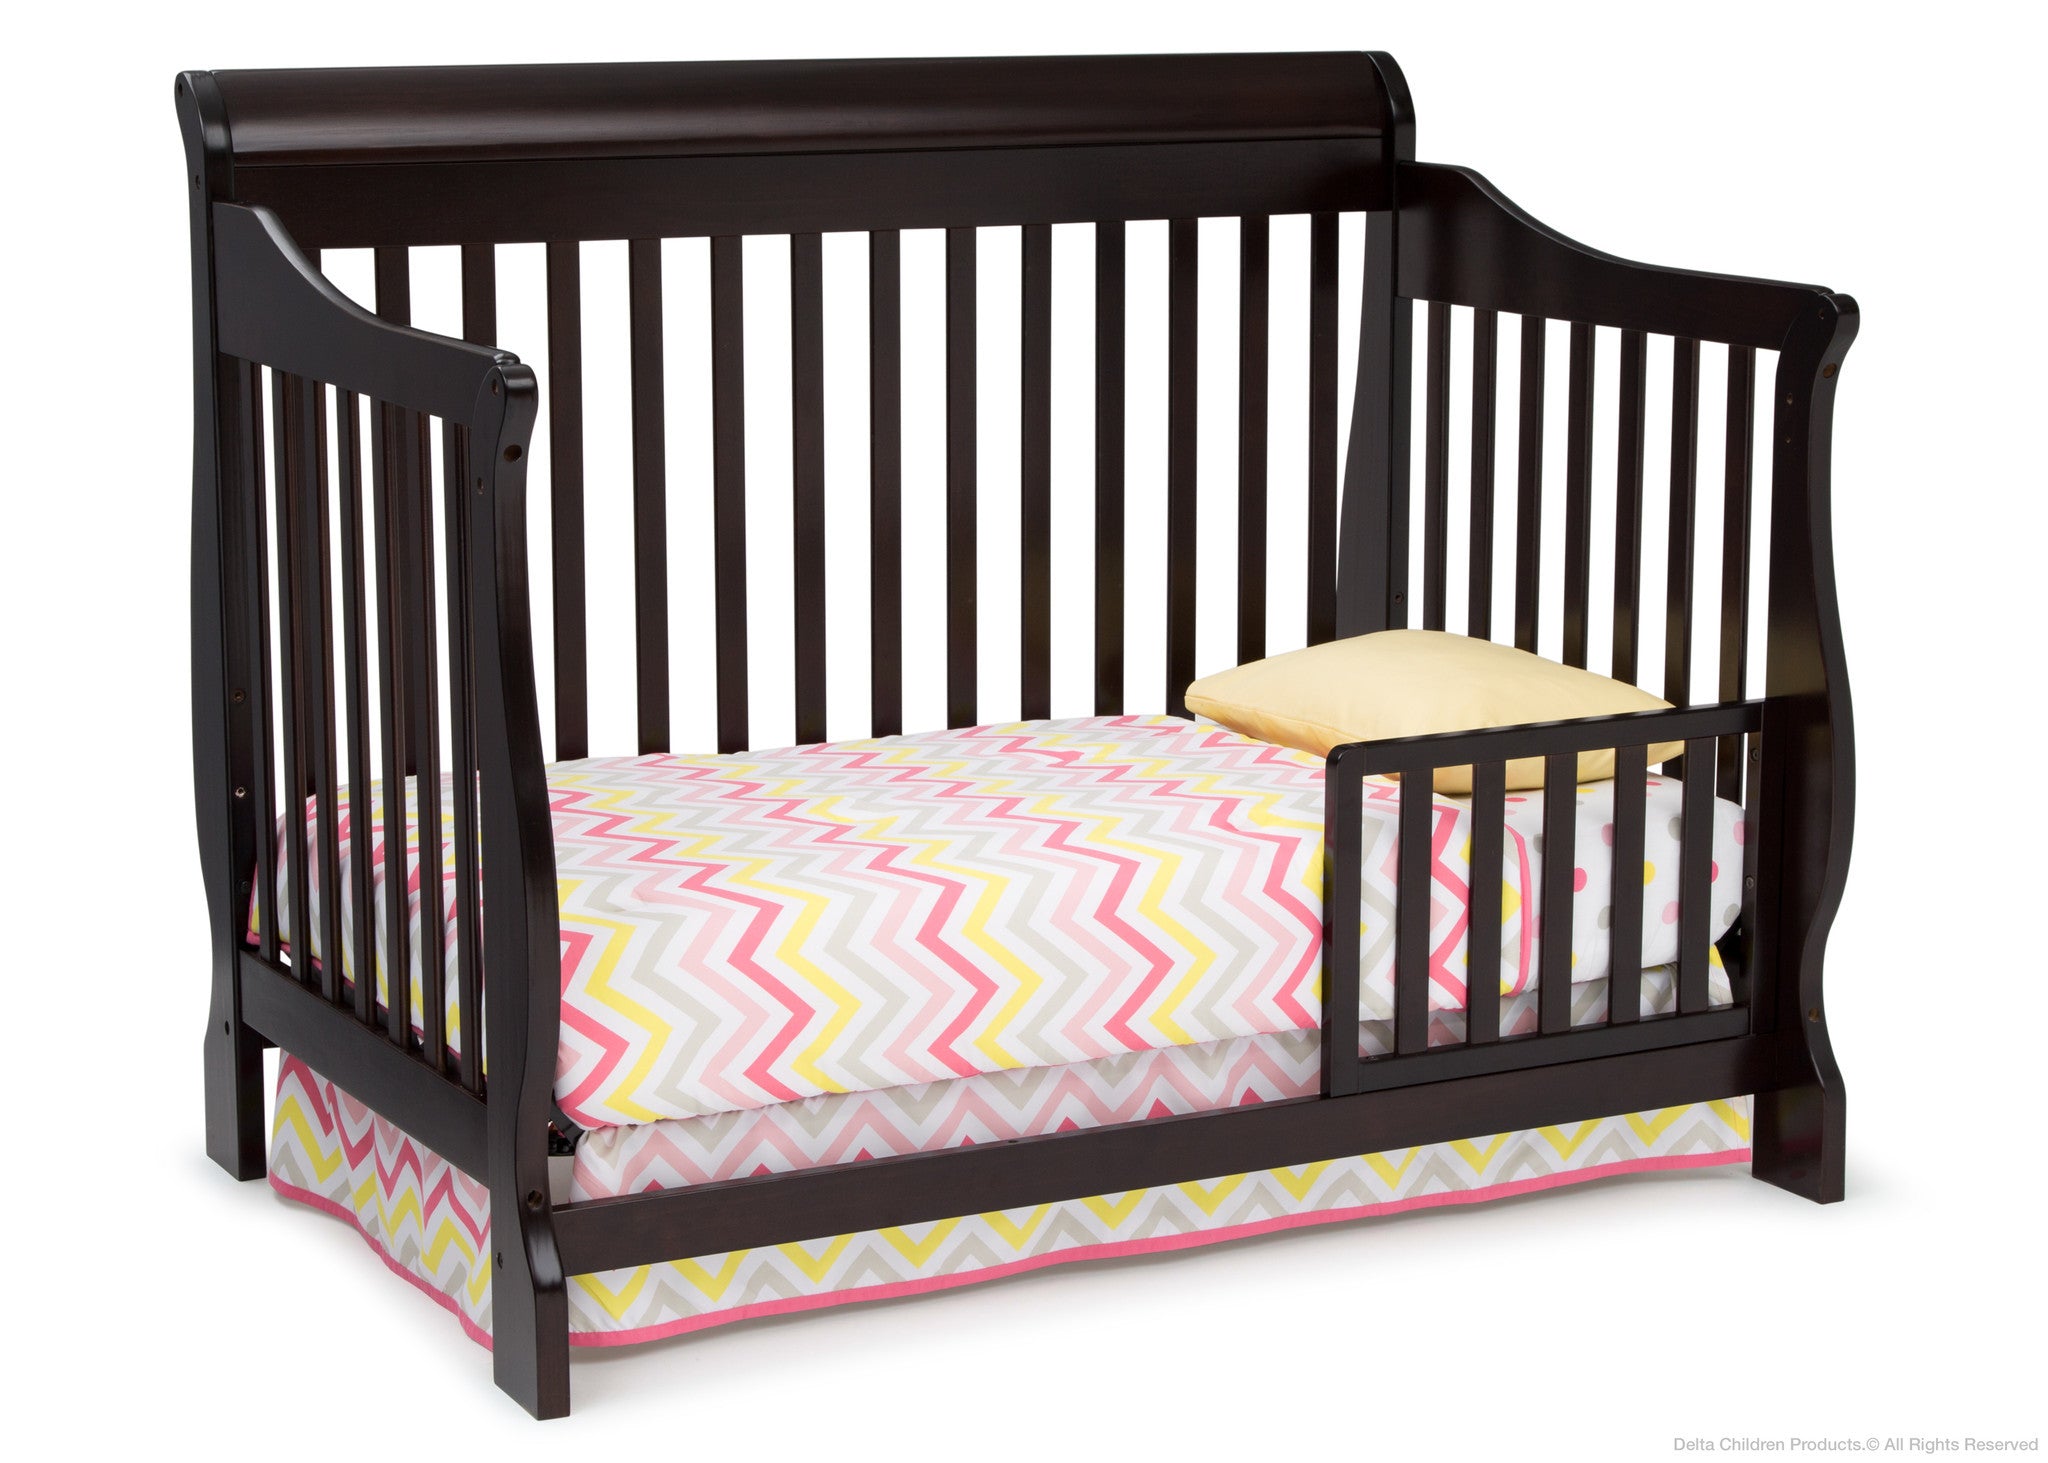 4 in 1 crib to toddler bed